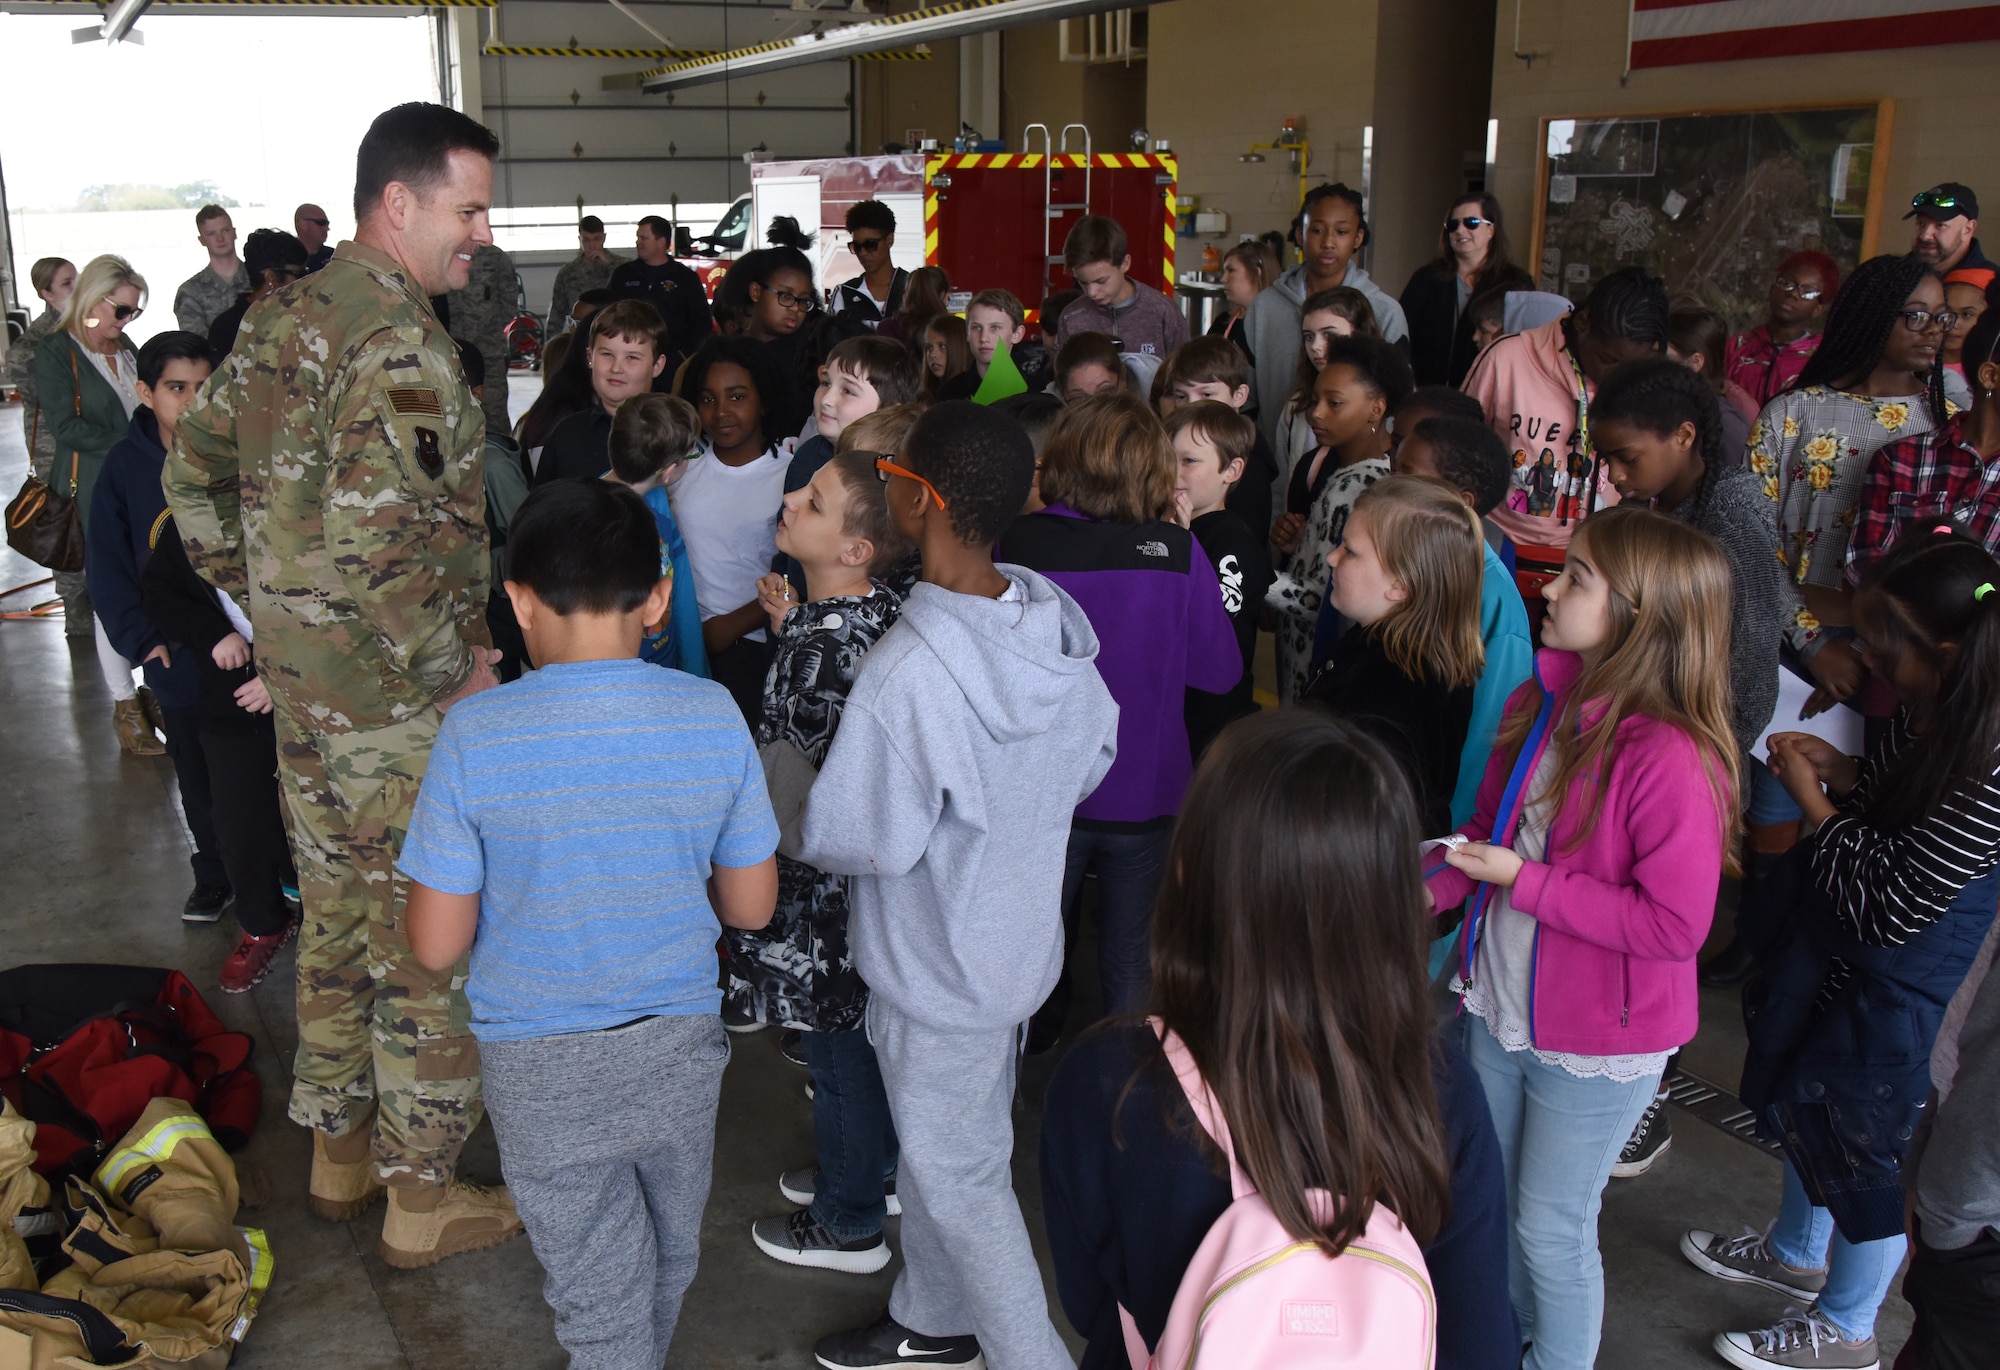 U.S. Air Force Col. Lance Burnett, 81st Training Wing vice commander, delivers closing remarks to school-aged children during Biloxi School District Career Exploration Day on Keesler Air Force Base, Mississippi, March 7, 2019. Throughout their visit, the children toured the 334th Training Squadron air traffic control school, 335th TRS weather facility, the Keesler Fire Department and received a demonstration from the 81st Security Forces Squadron military working dogs. (U.S. Air Force photo by Kemberly Groue)